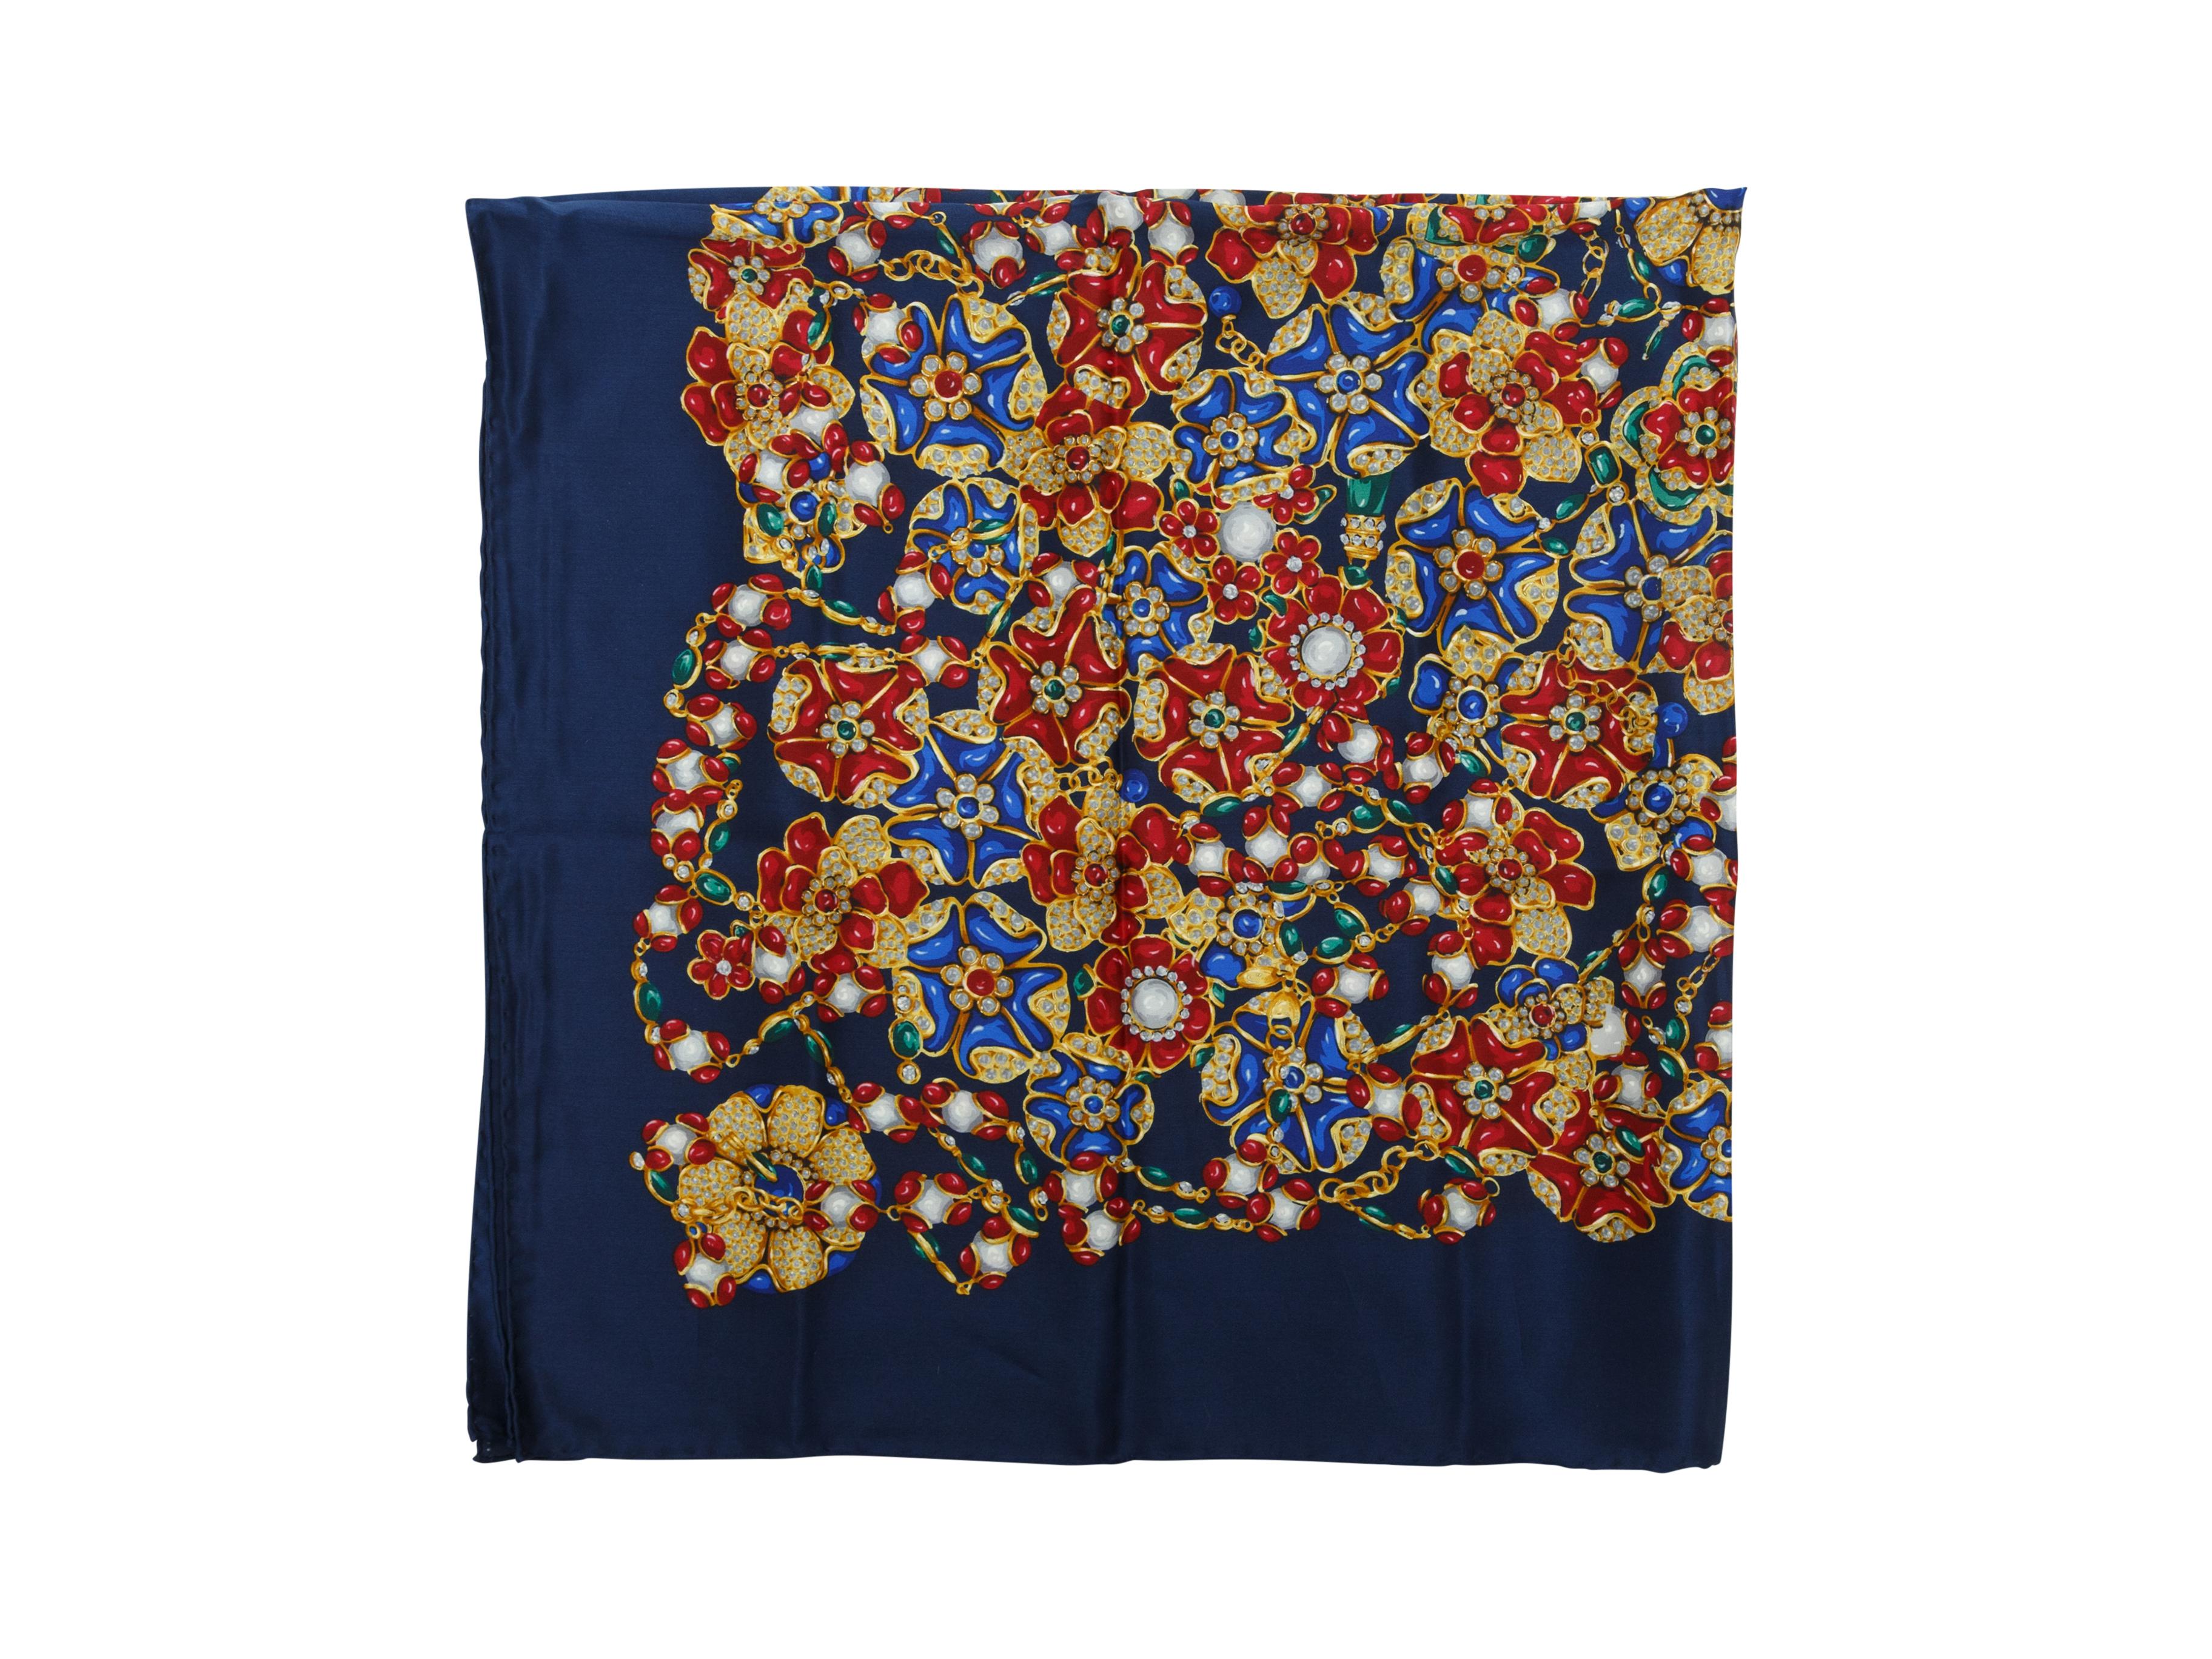 Product details: Navy and multicolor silk scarf by Chanel. Jewelry print throughout. 34